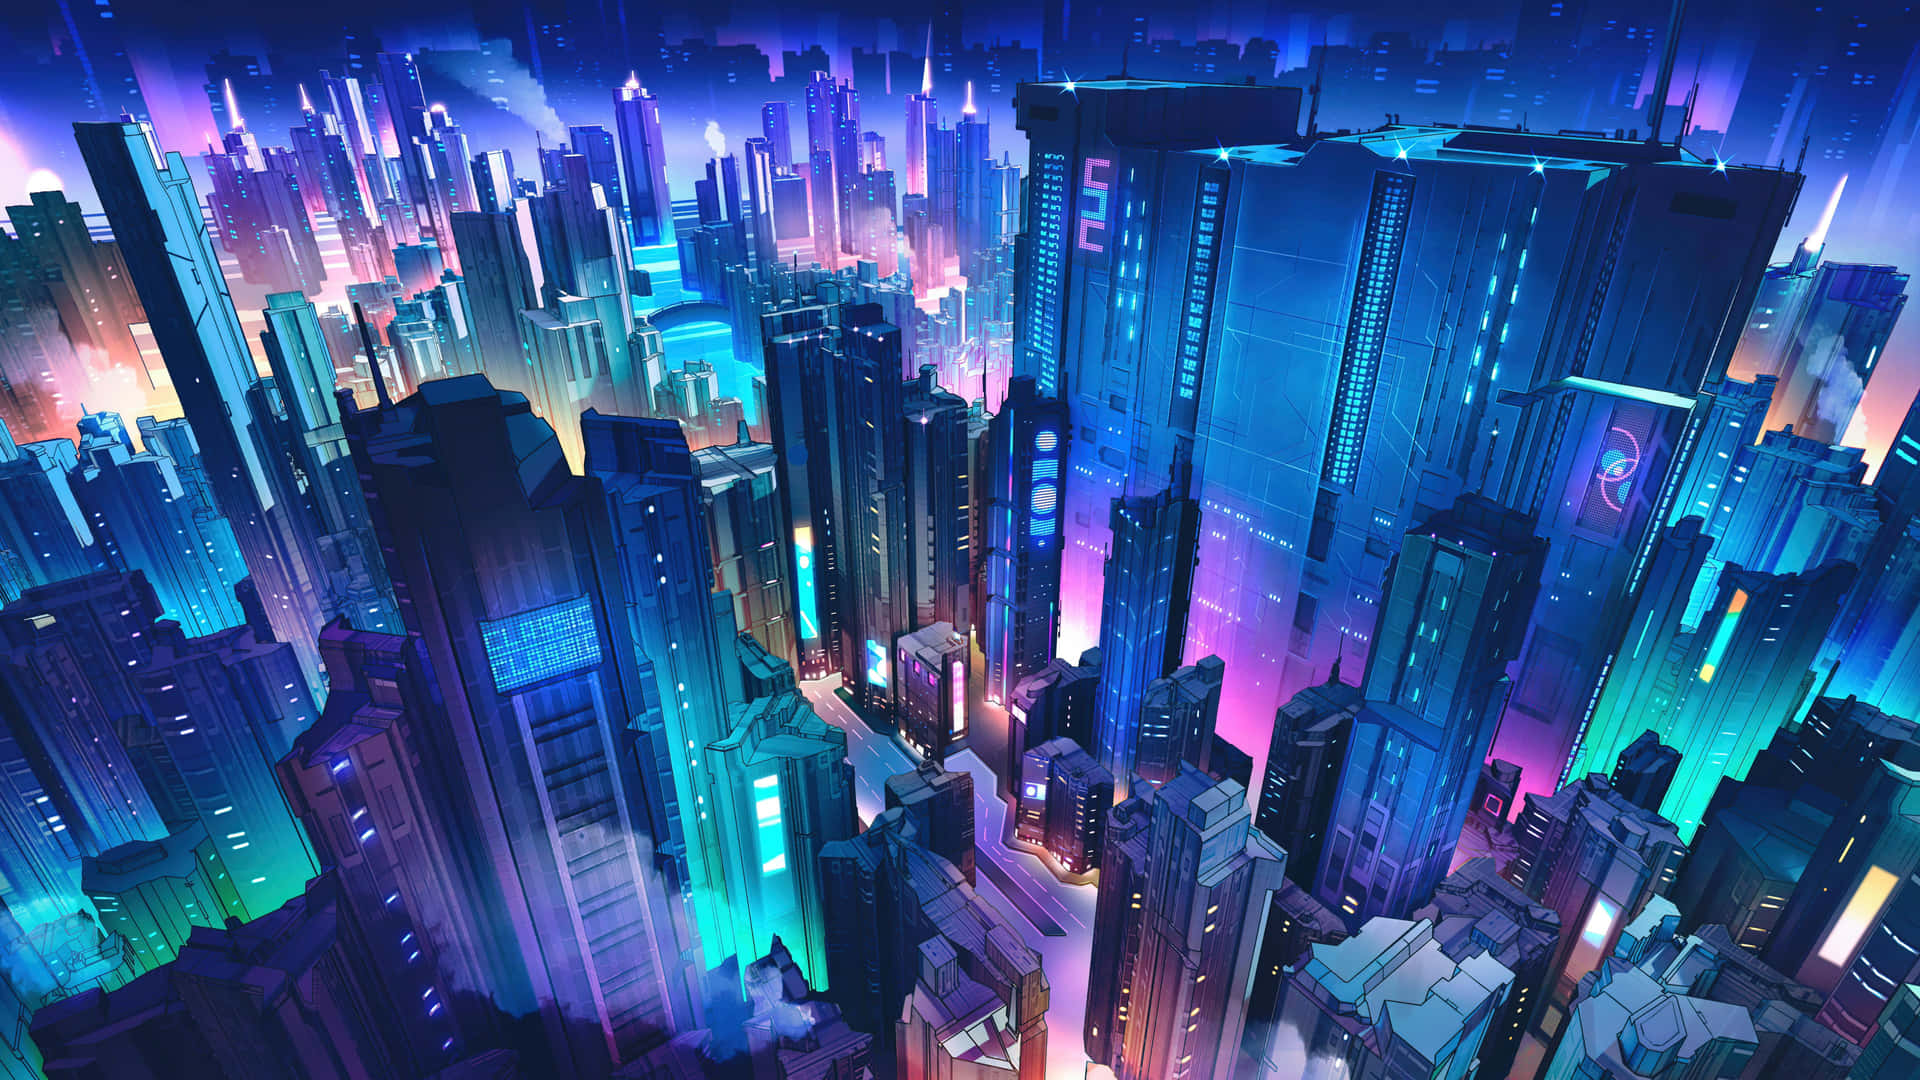 Explore an unknown future in the iconic skyline of a Futuristic City.